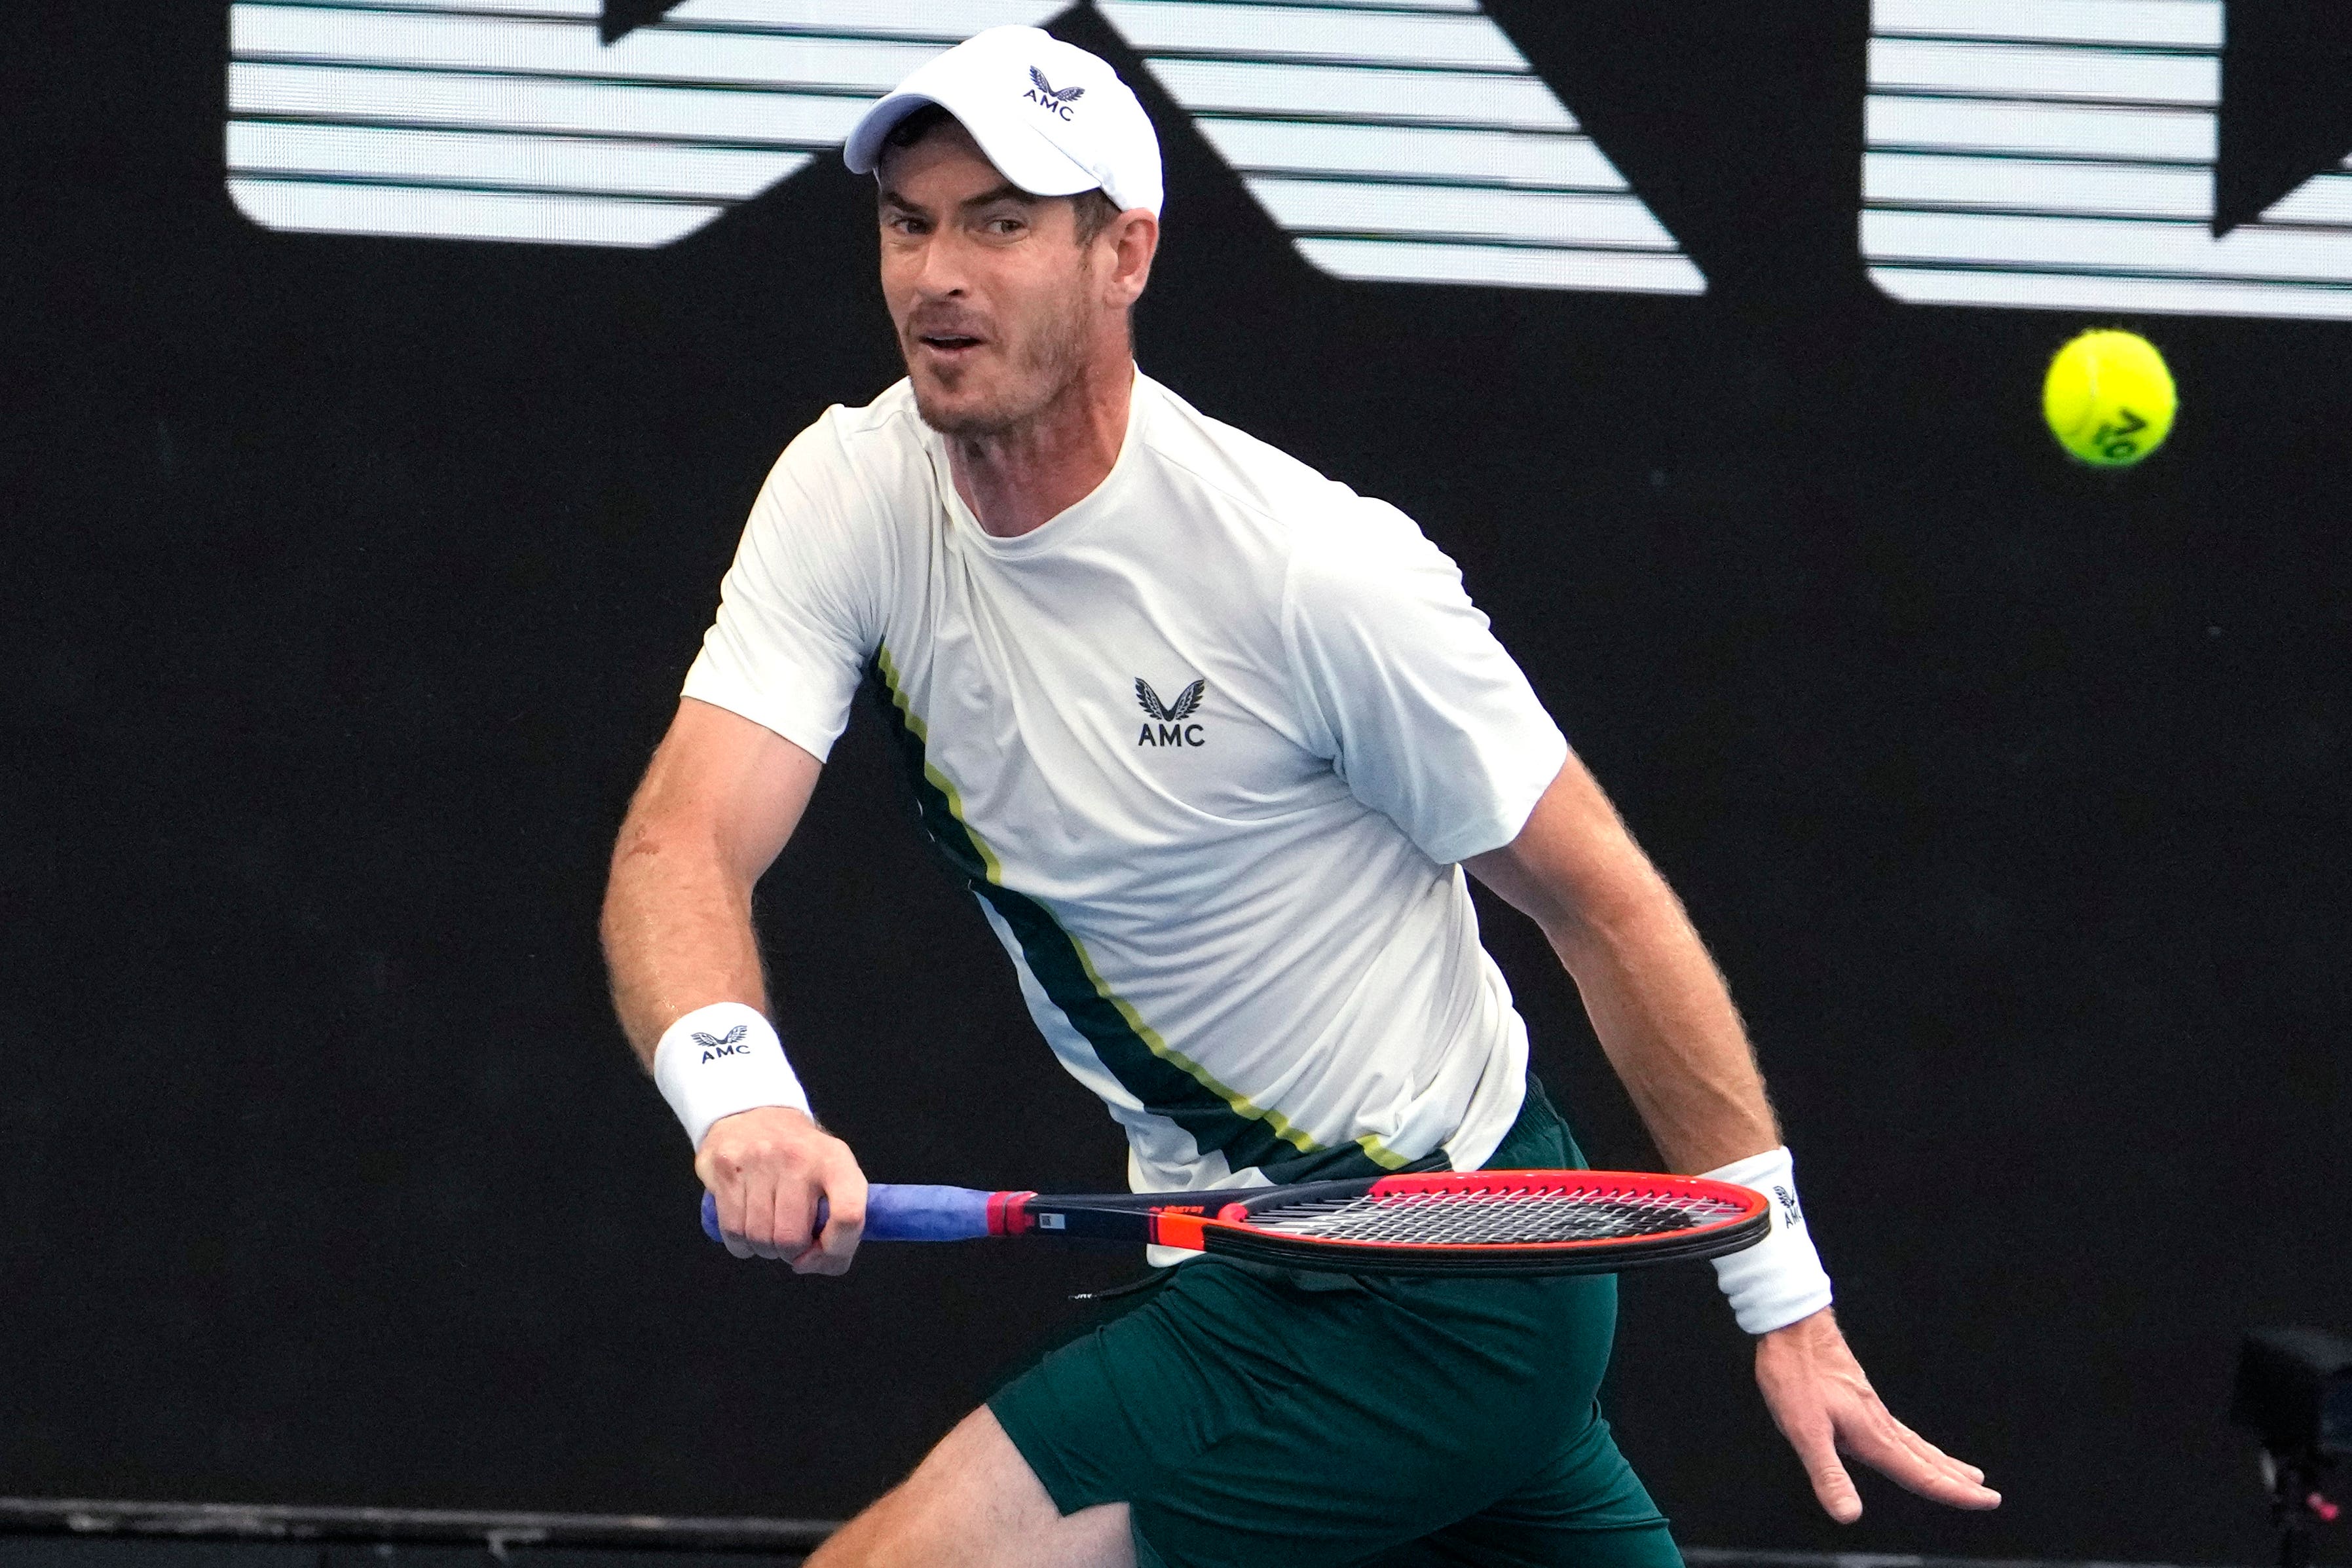 Andy Murray tipped to do damage at Wimbledon after Australian Open run The Independent